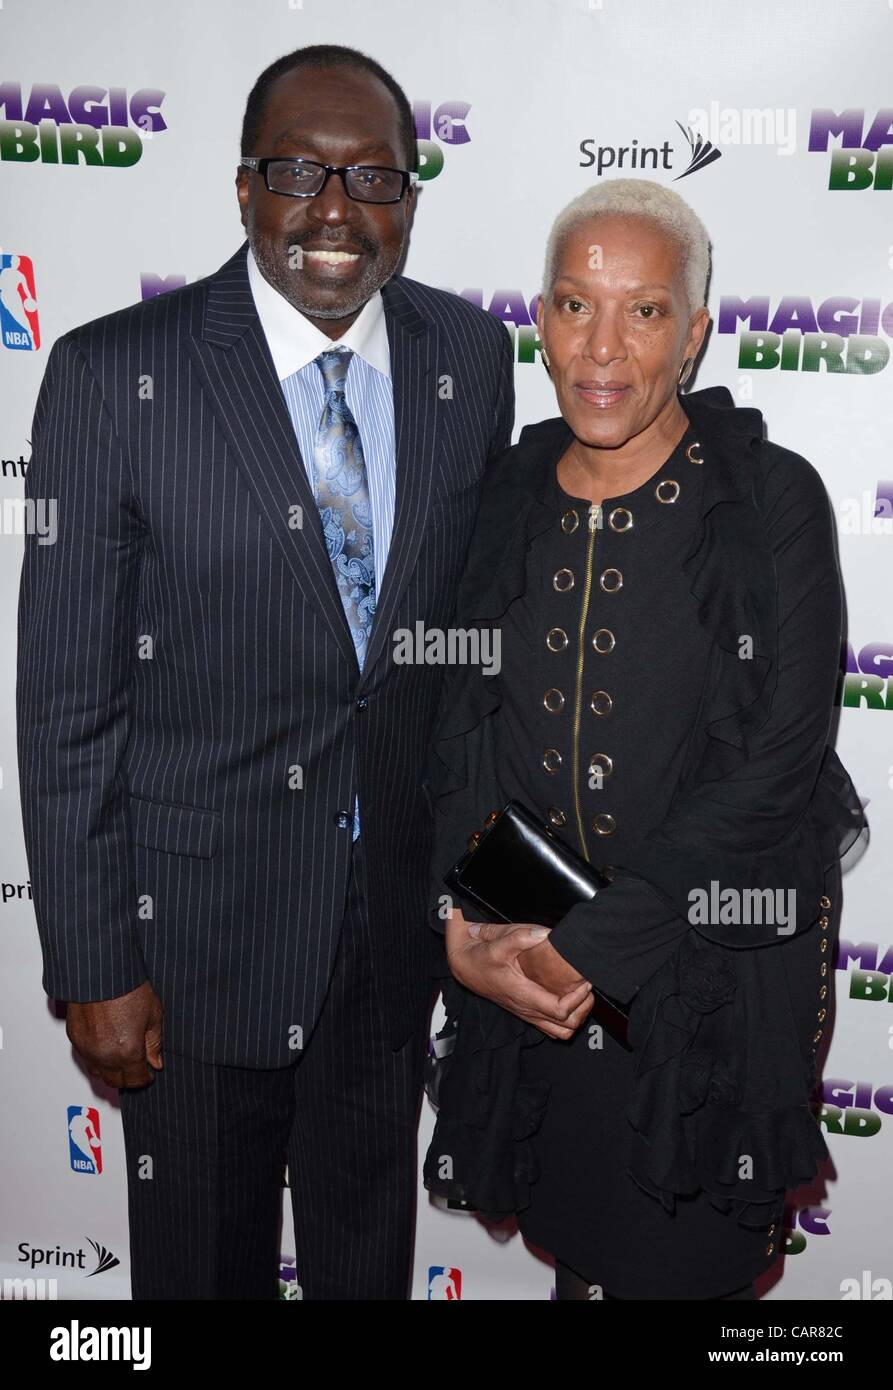 Earl Monroe, Marita Green at arrivals for MAGIC/BIRD Premiere, Longacre Theatre, New York, NY April 11, 2012. Photo By: Derek Storm/Everett Collection Stock Photo